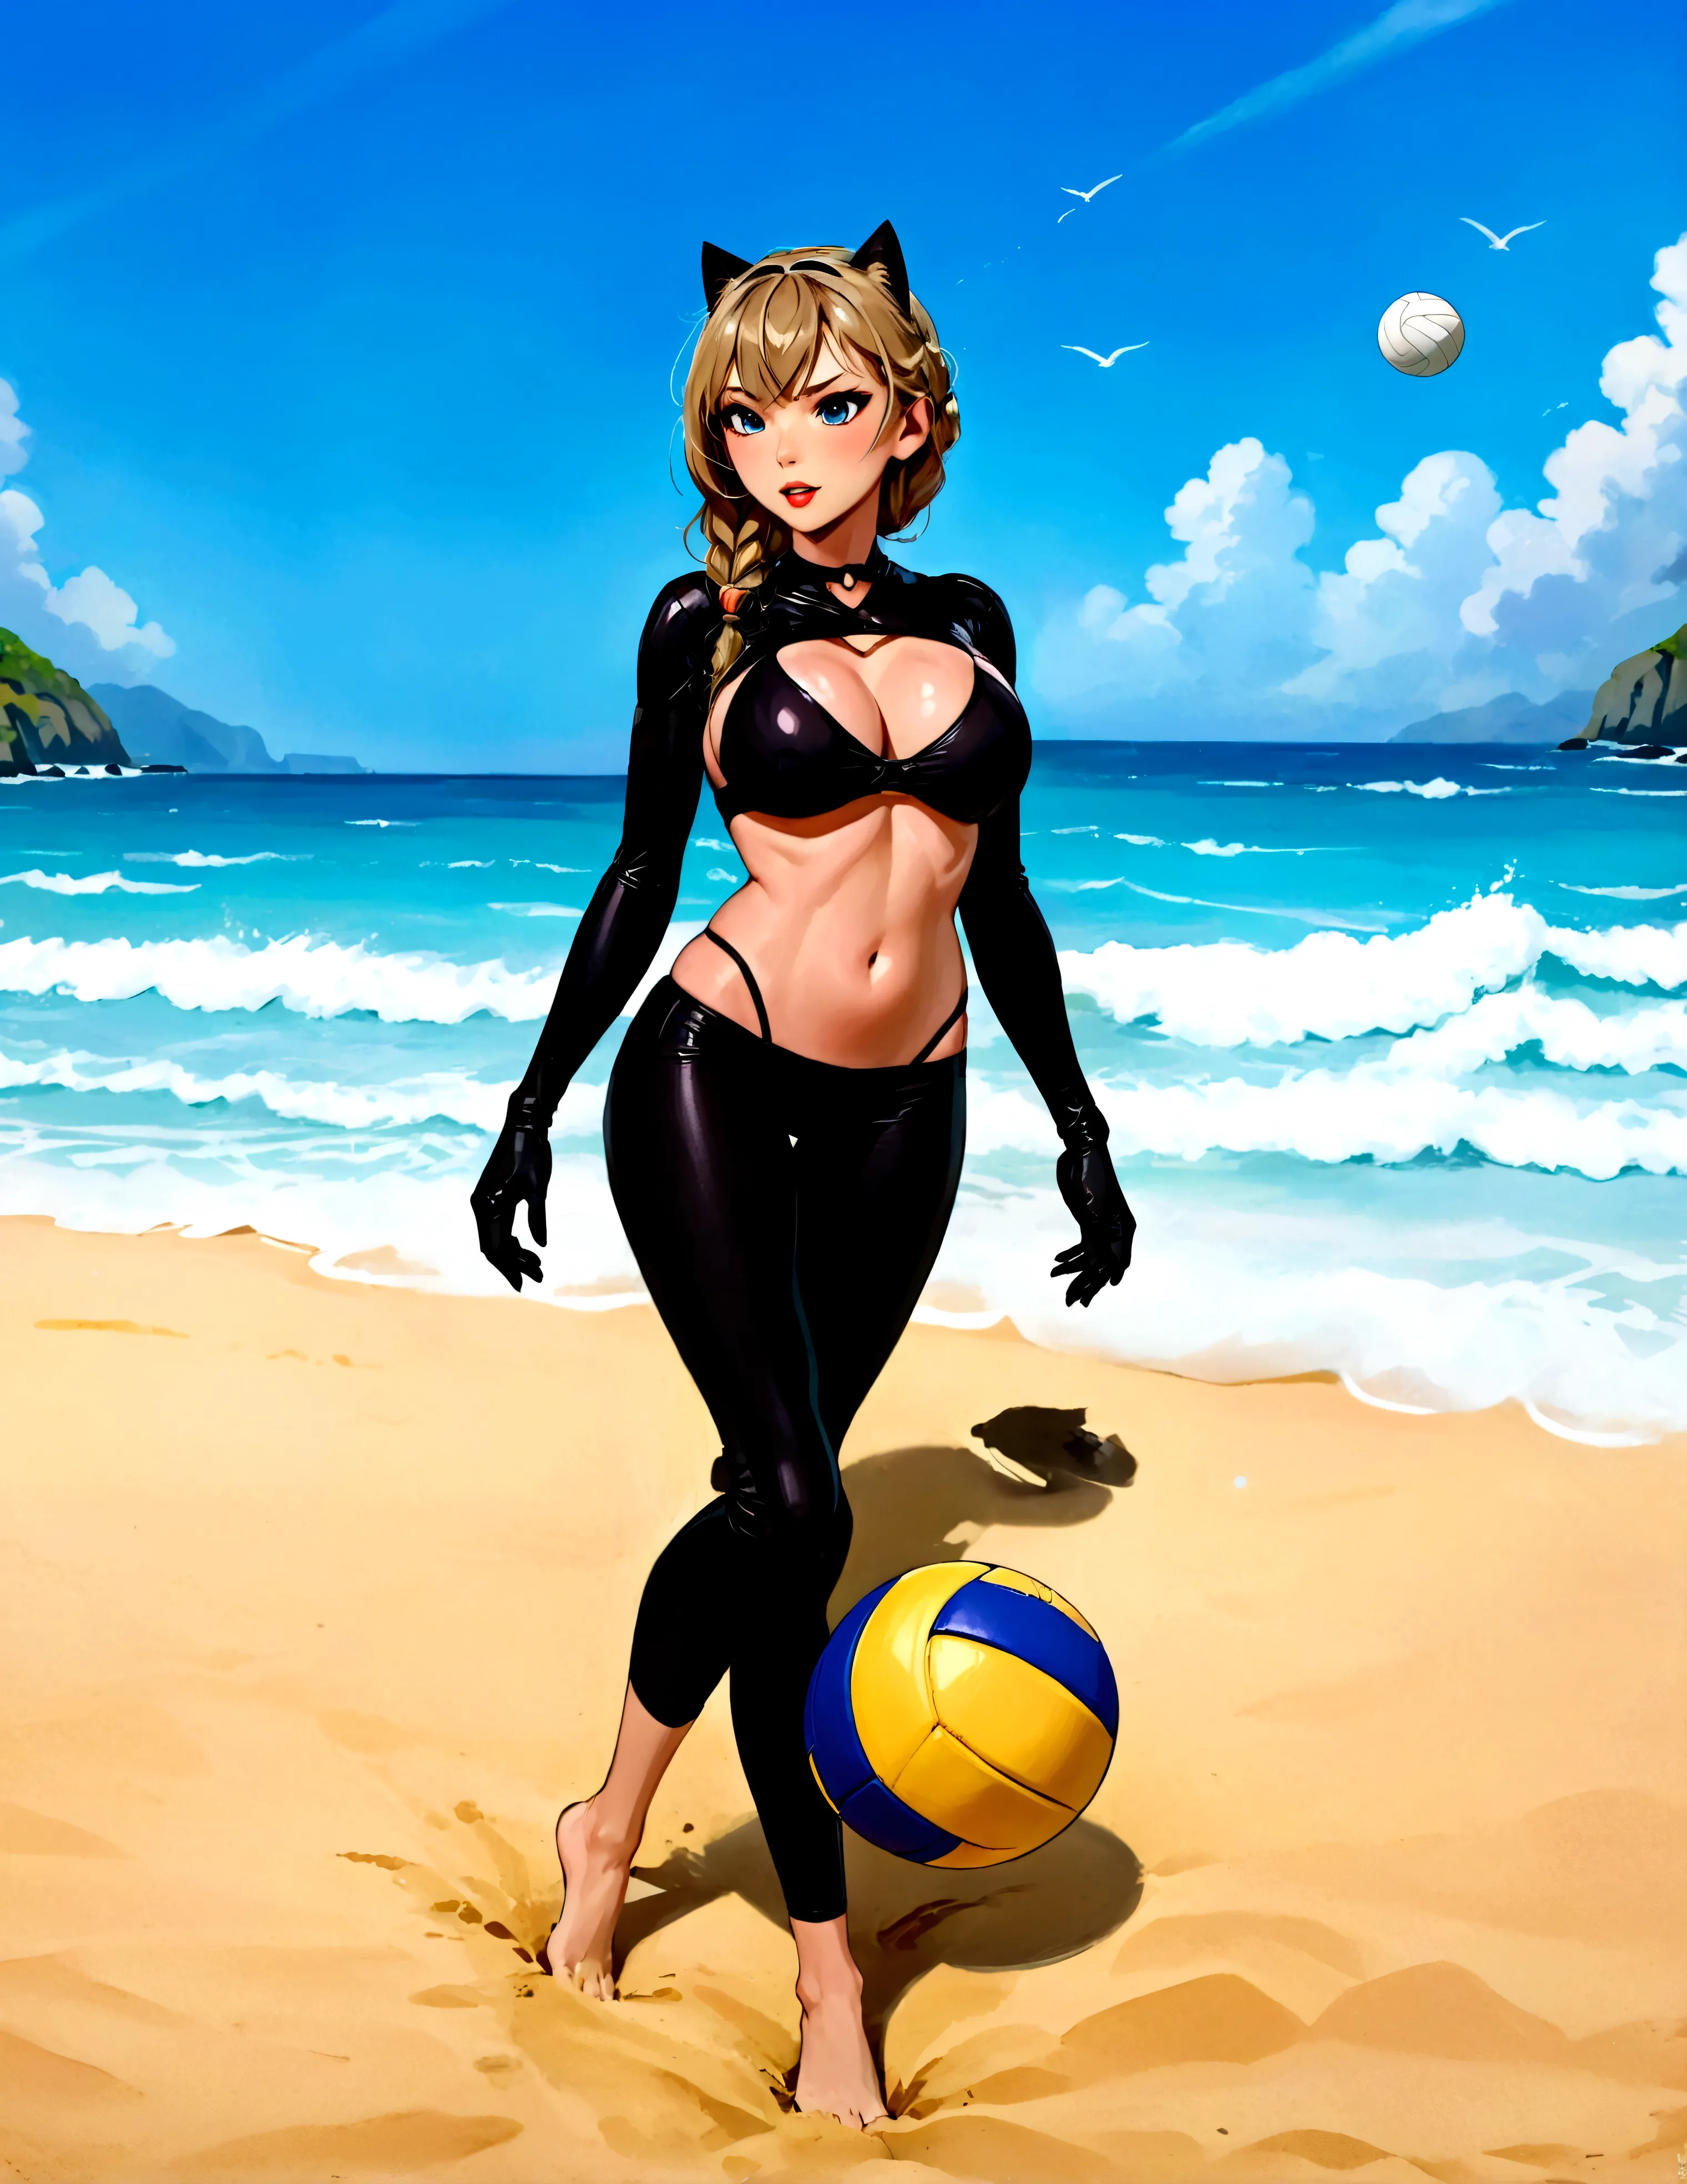 swift woman as Catwoman in a sinfully sexy beach outfit (breasts and butt over exposed) is playing volleyball on the beach
